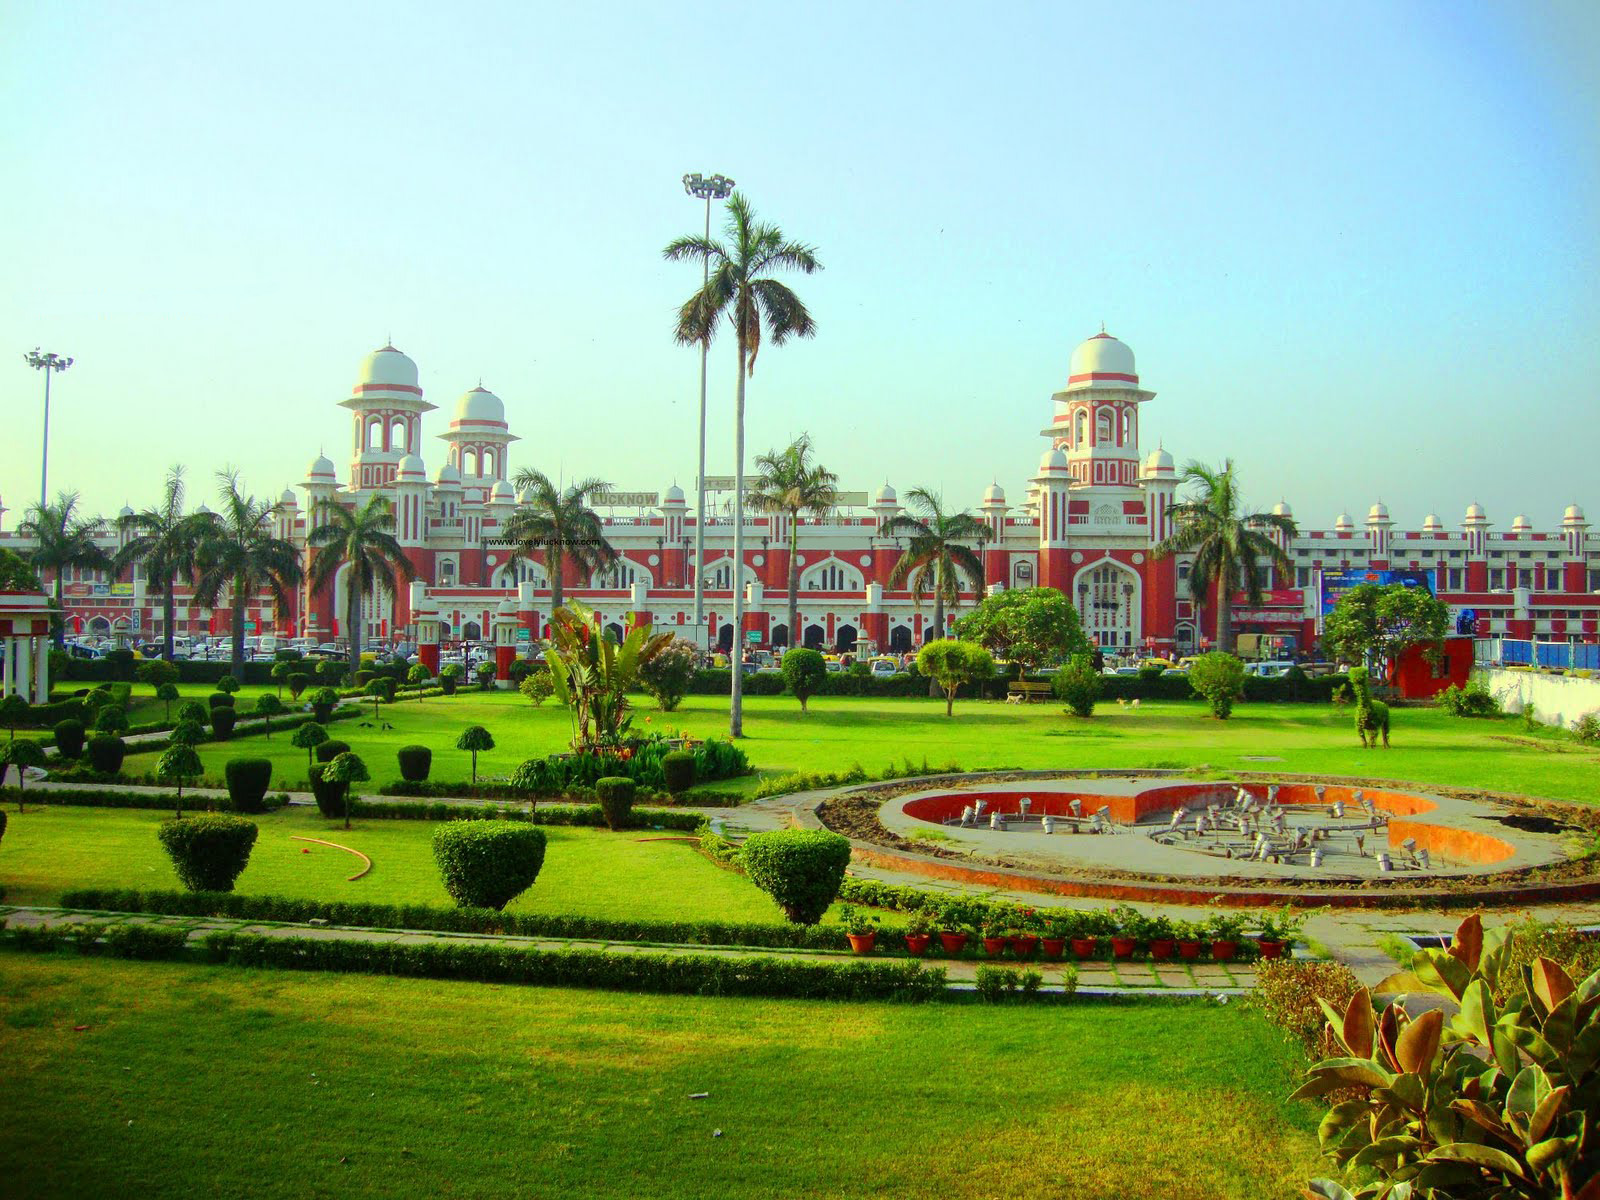 Charbagh Railway Station in Lucknow, India